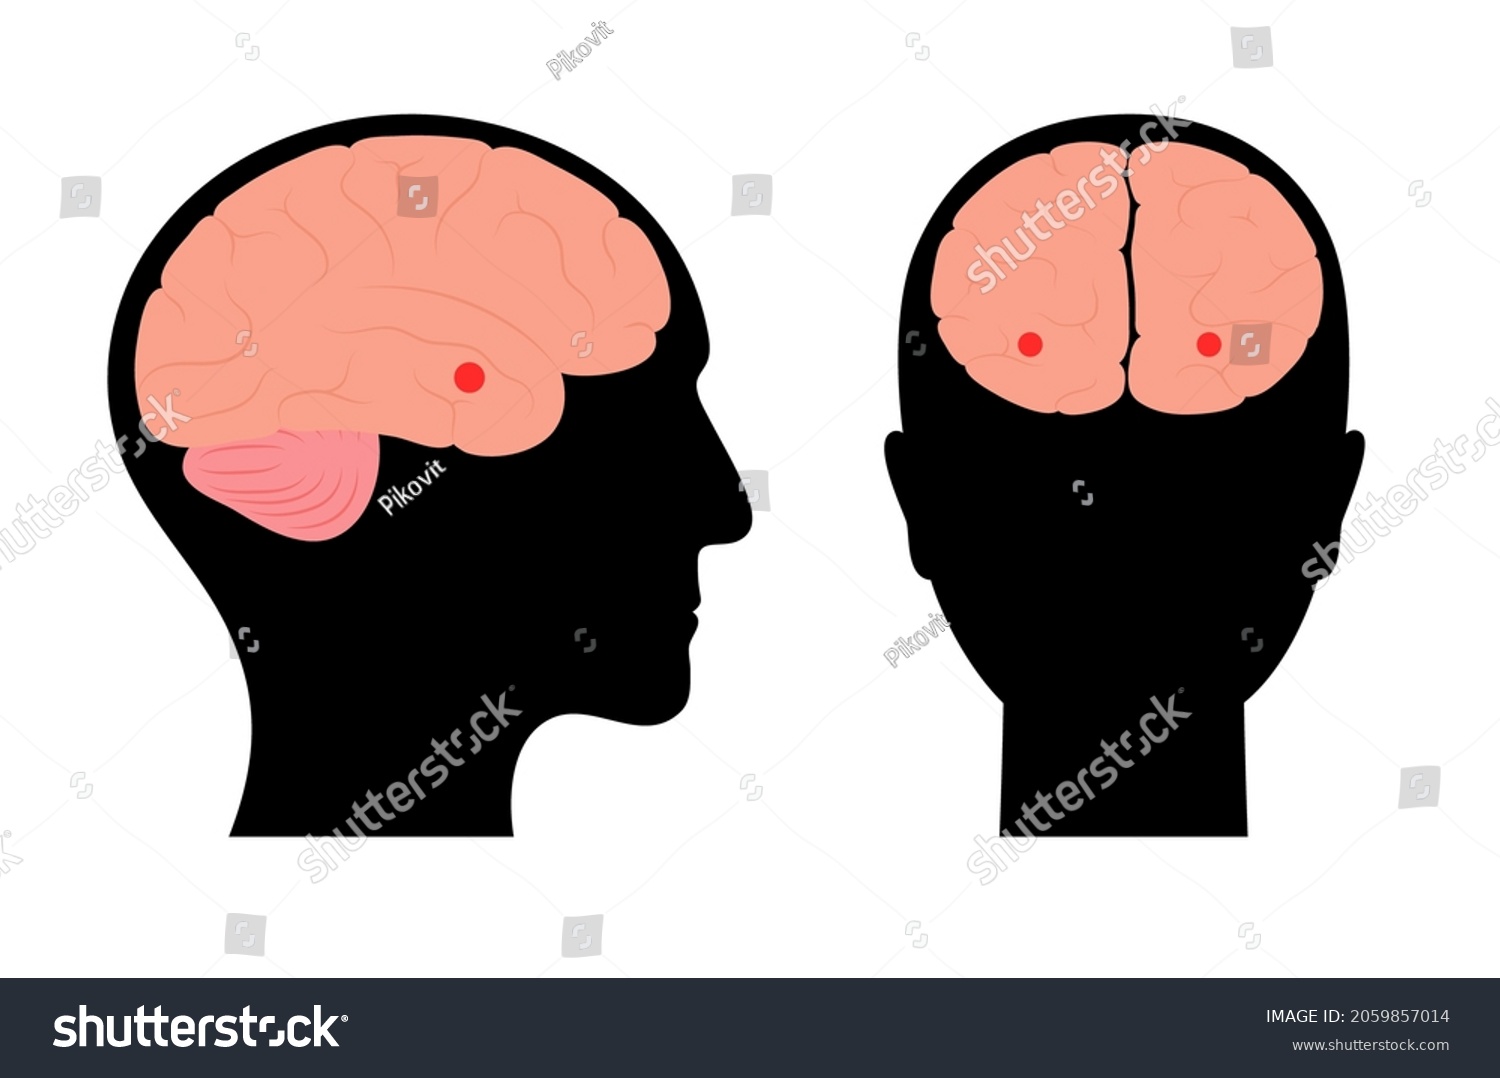 SVG of Amygdala and limbic system concept. Human brain anatomy in male silhouette. Cerebral cortex and cerebrum medical poster flat vector illustration for clinic or education. svg